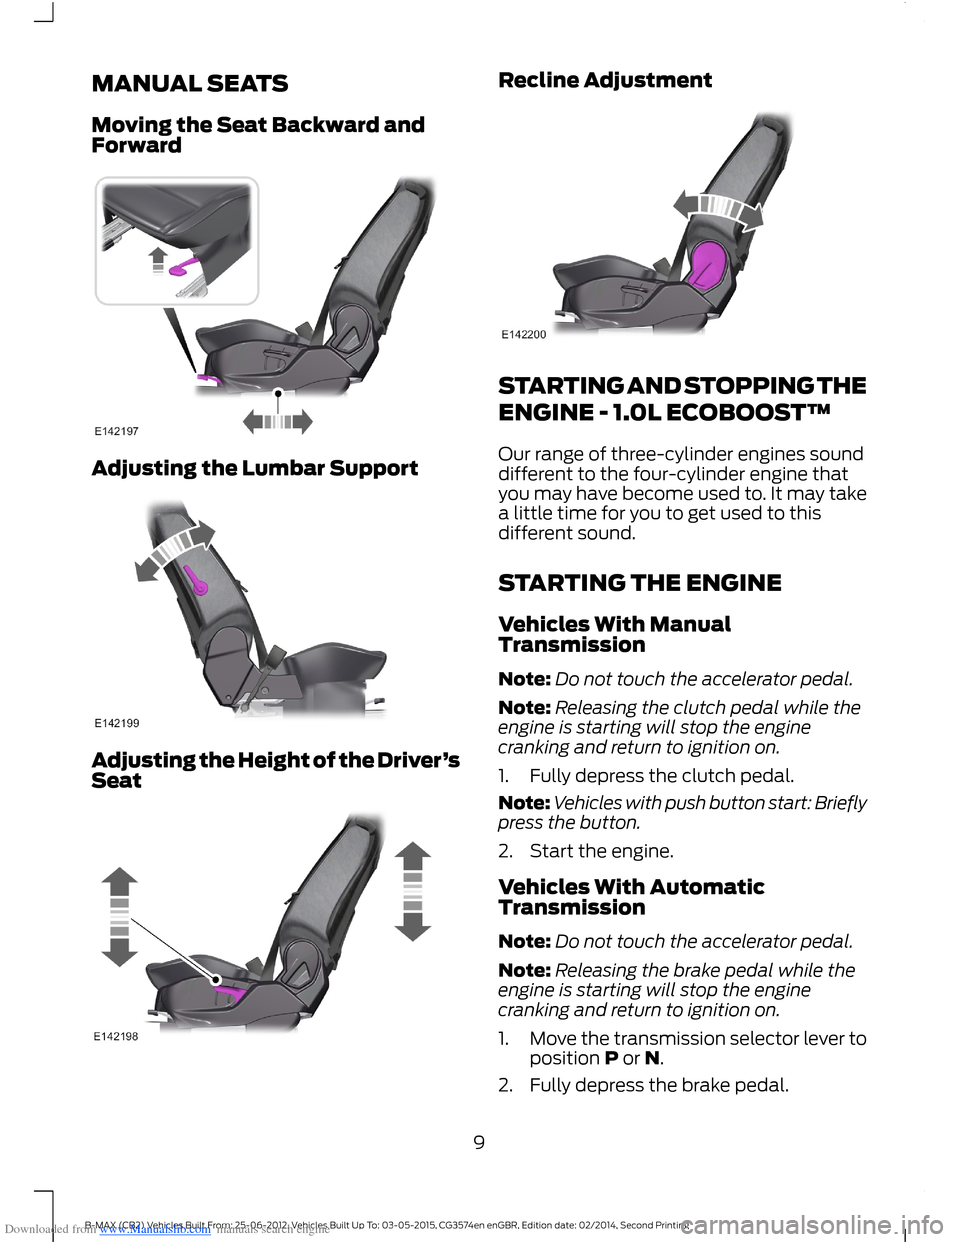 FORD B MAX 2014 1.G Quick Reference Guide Downloaded from www.Manualslib.com manuals search engine MANUAL SEATS
Moving the Seat Backward andForward
Adjusting the Lumbar Support
Adjusting the Height of the Driver’sSeat
Recline Adjustment
STA